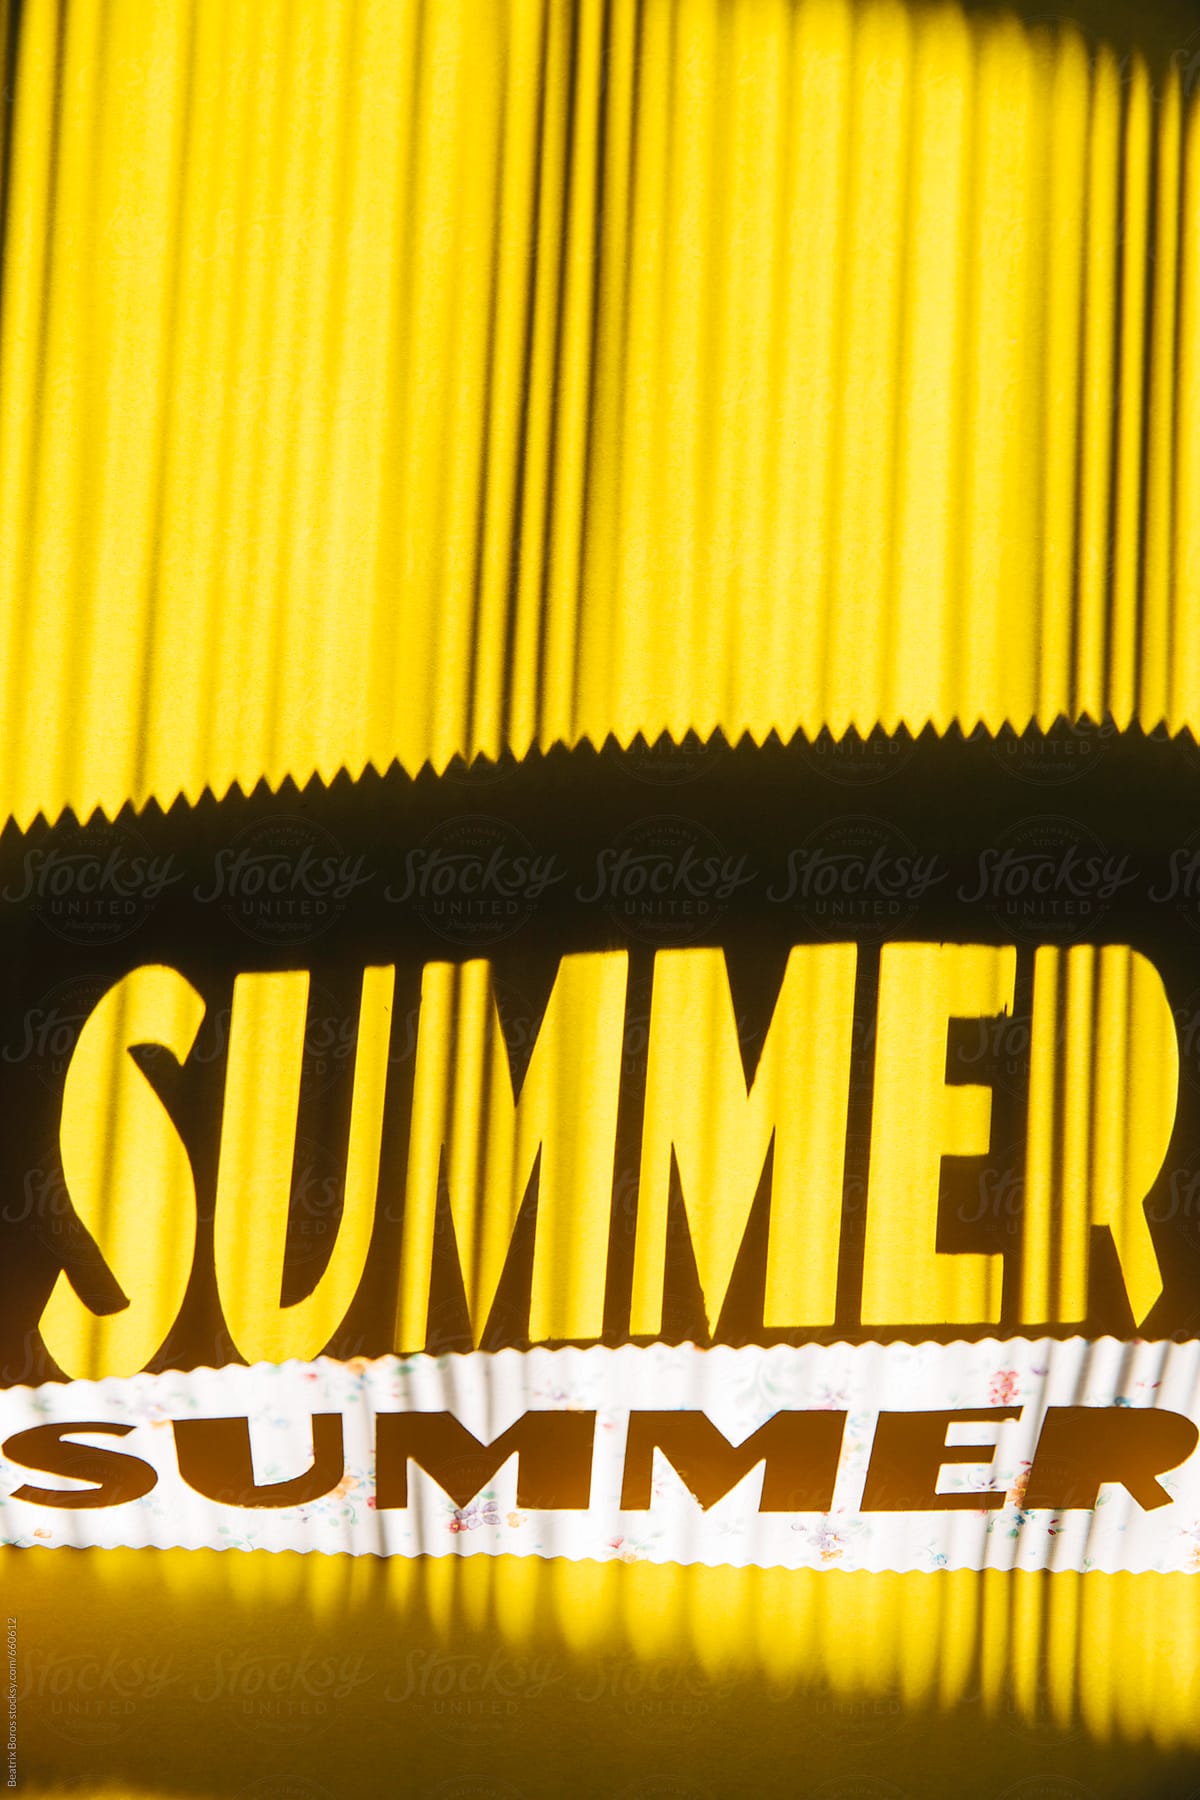 Word summer reflected on a yellow background, made with a handmade stencil